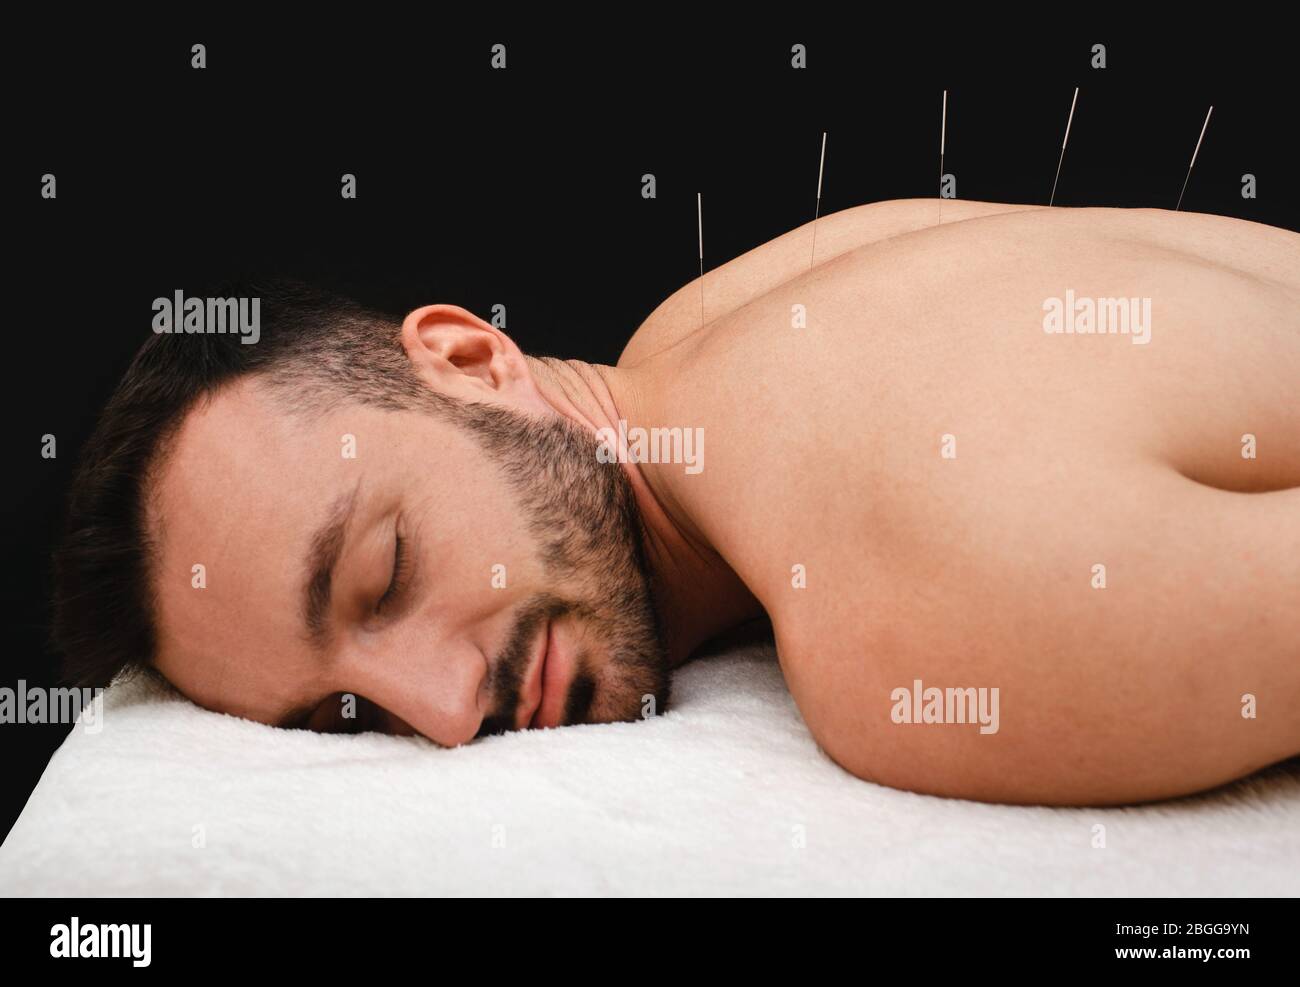 Male during acupuncture procedure. Spinal acupuncture for intervertebral hernias and protrusions. Acupuncture needles close up on black background Stock Photo